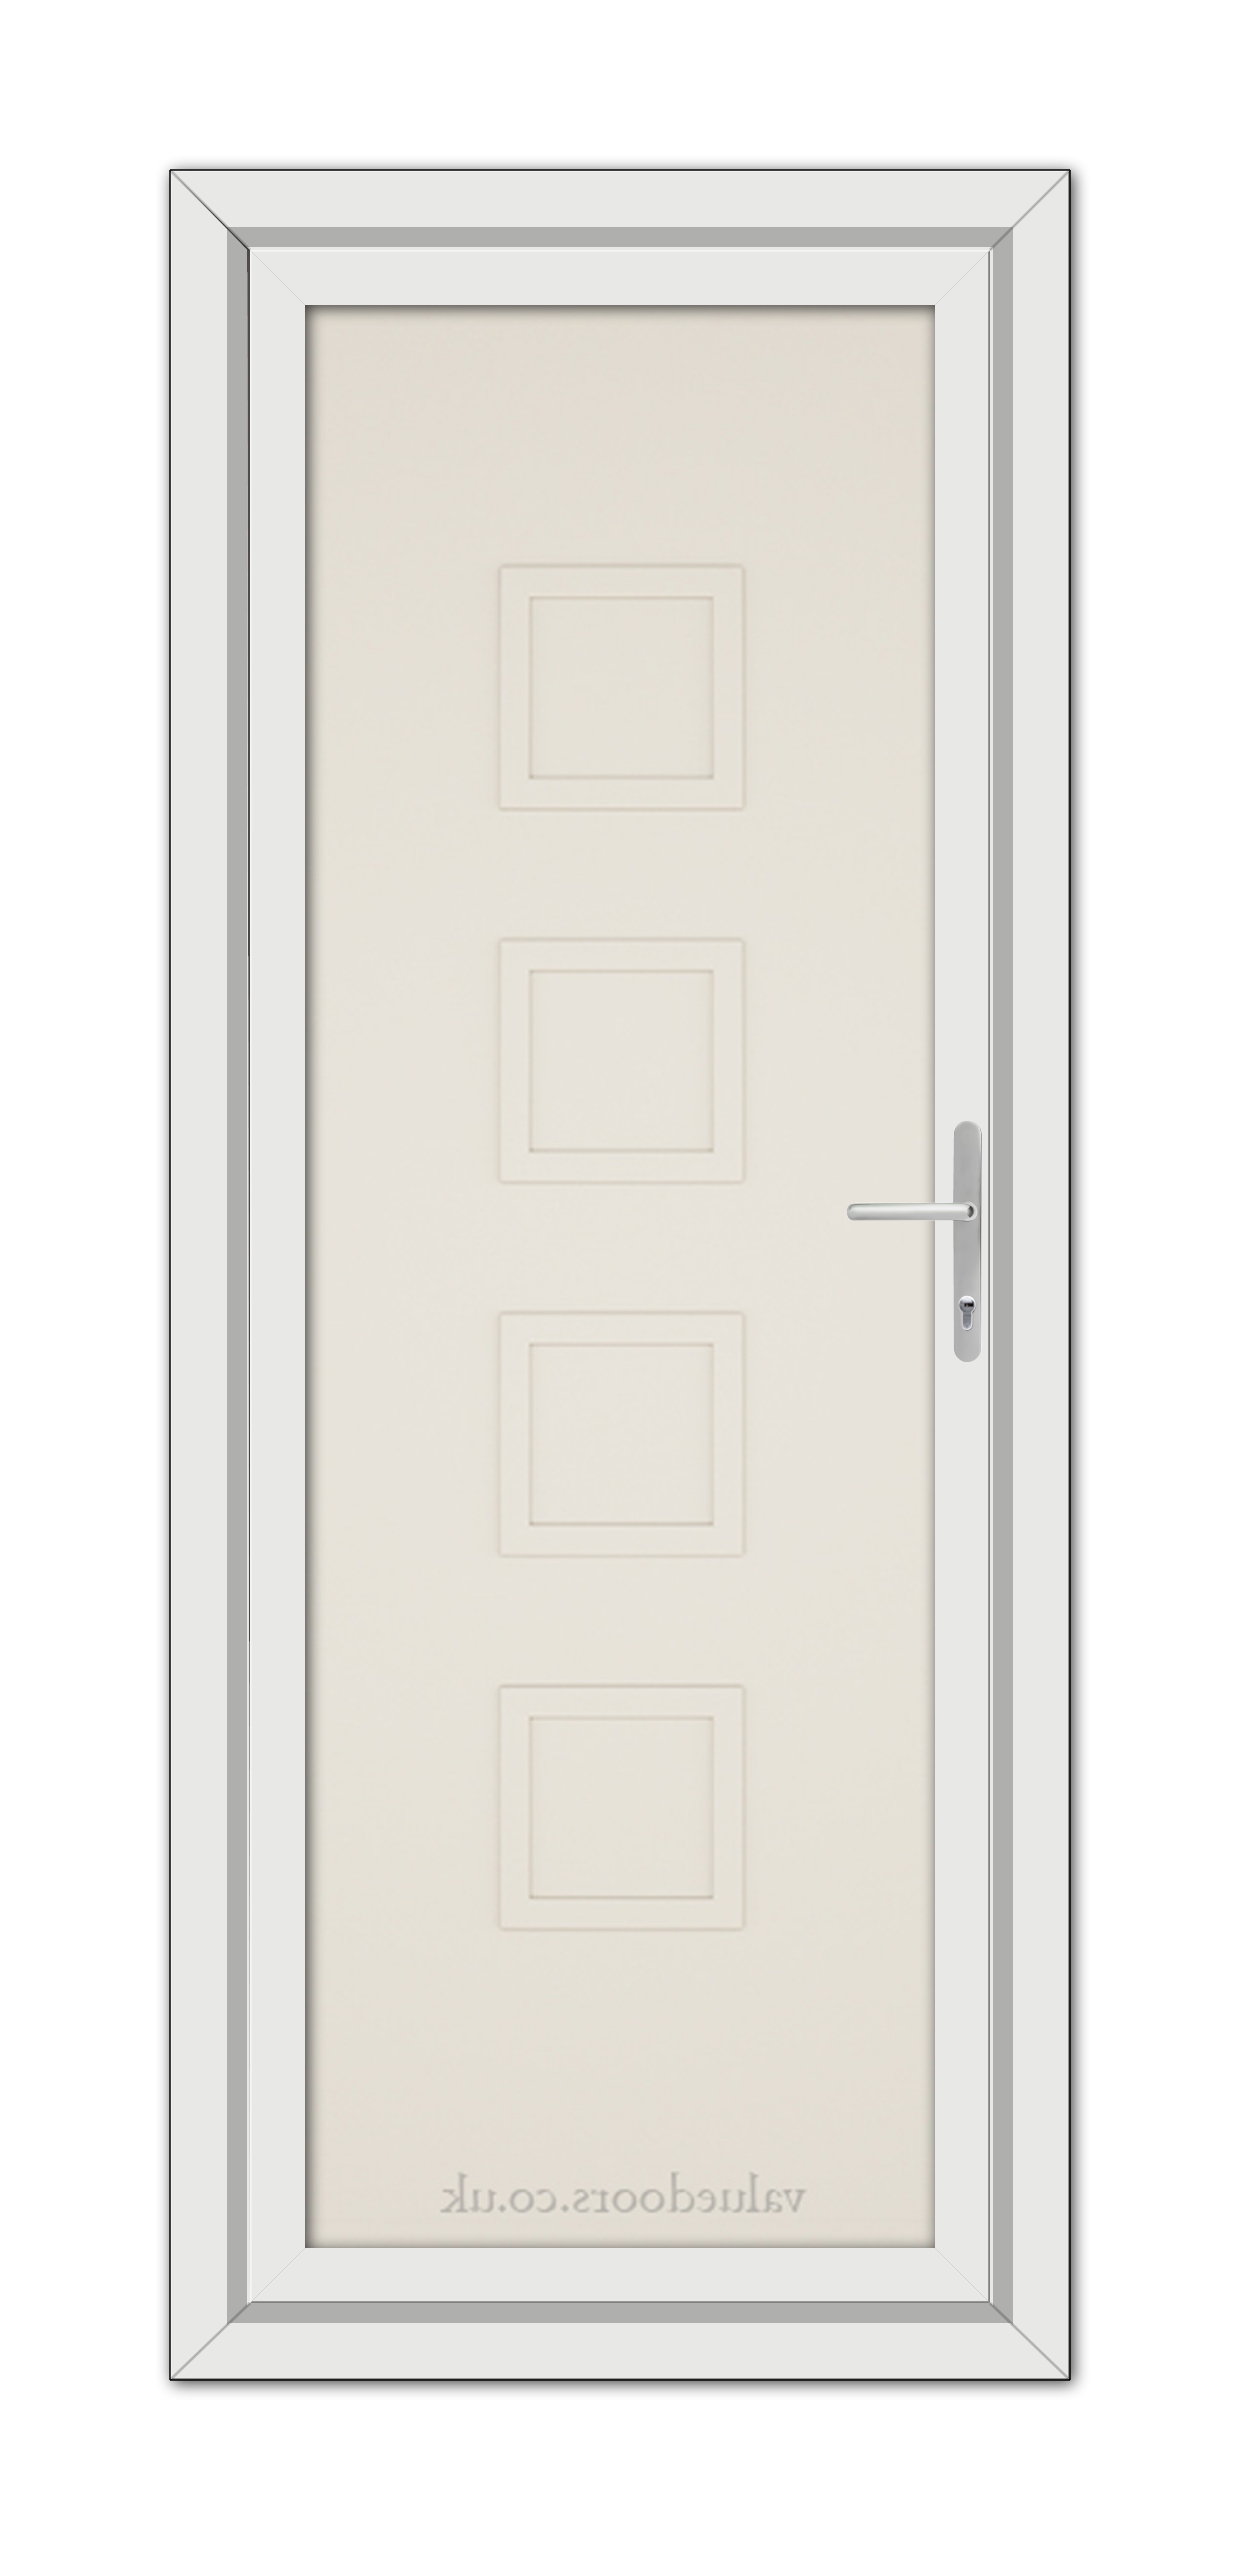 A vertical image of a Cream Modern 5034 Solid uPVC Door with a silver frame, featuring a white handle and four symmetrical square panels.